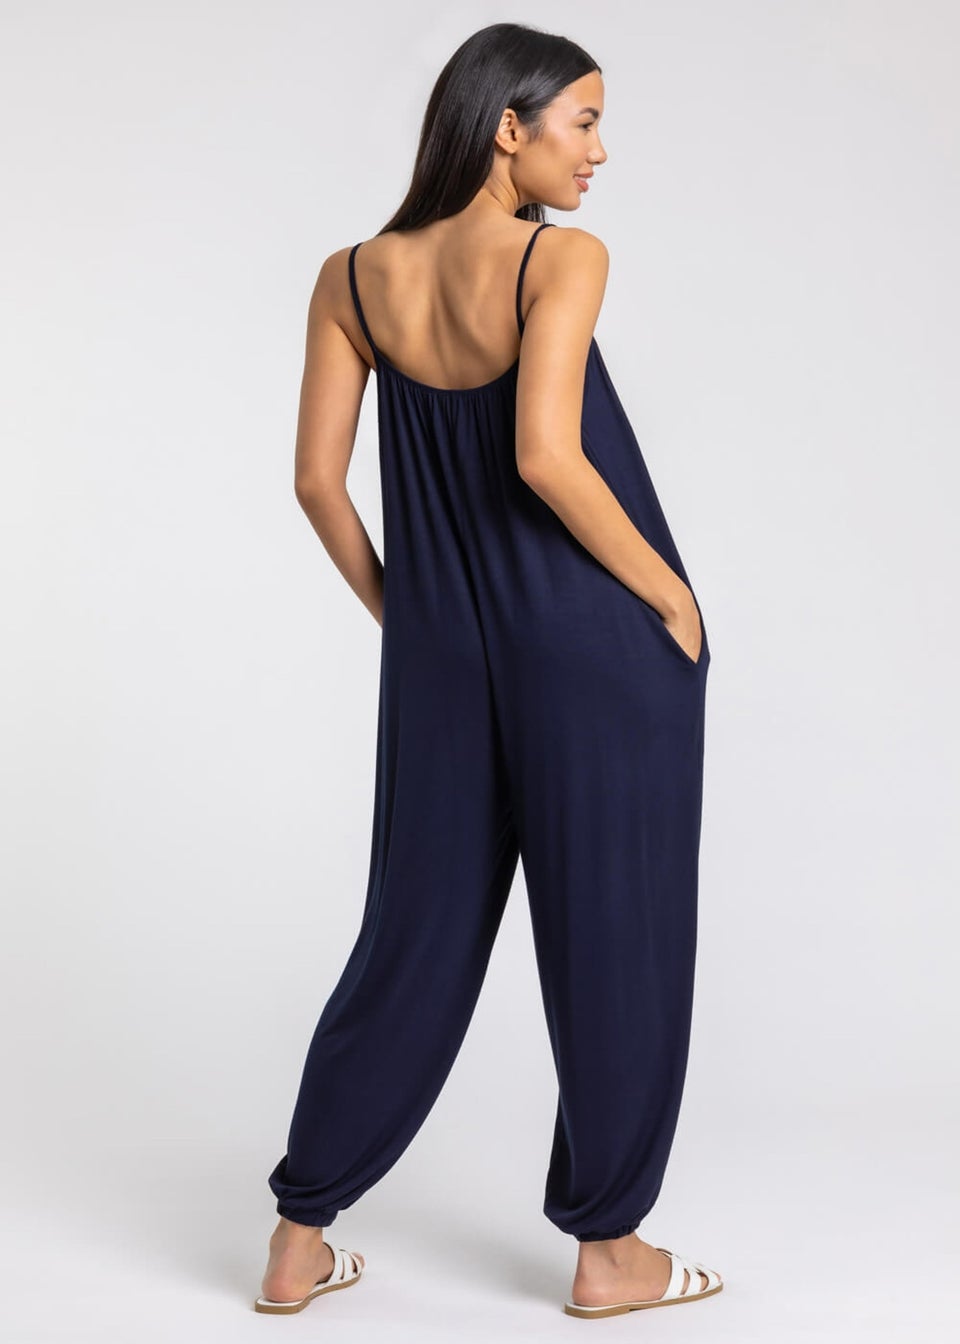 Roman Navy Strappy Full Length Jersey Jumpsuit